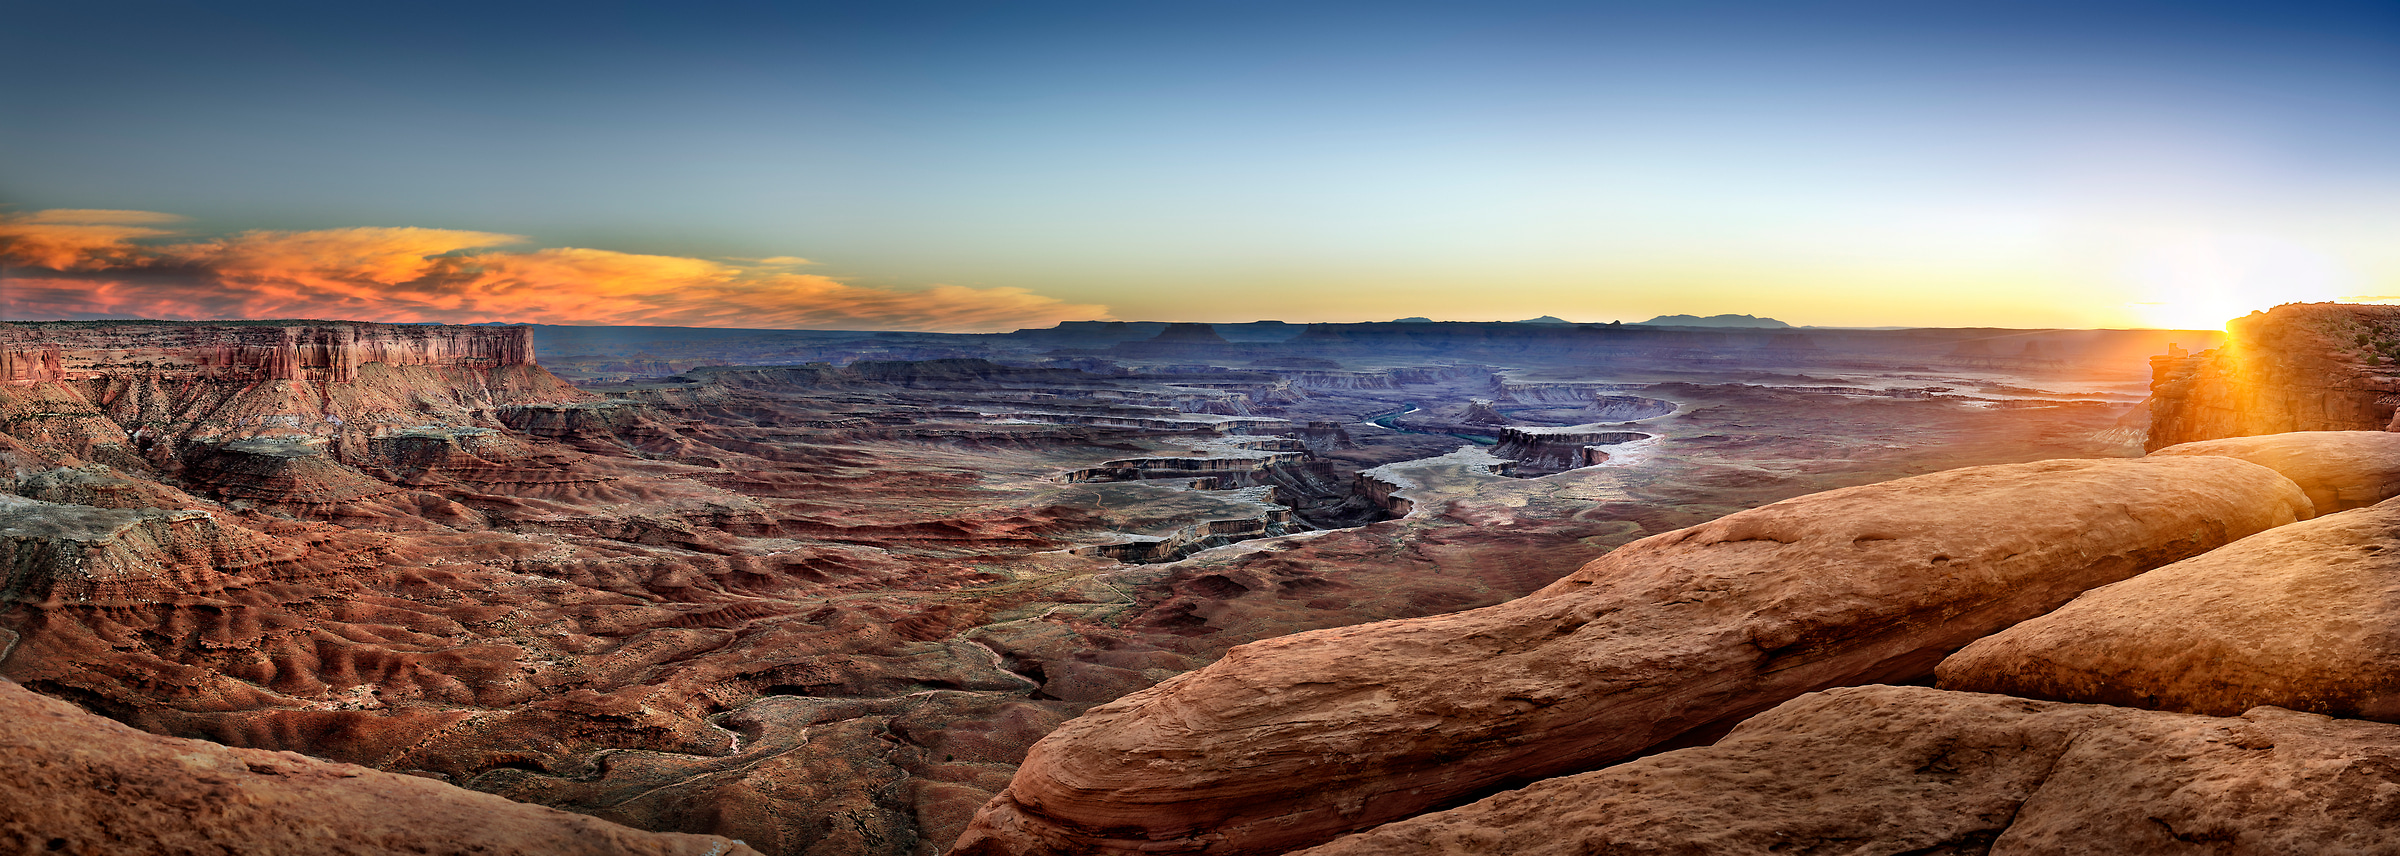 287 megapixels! A very high resolution panorama photo of Canyonlands National Park; VAST photo created by Phil Crawshay in Canyonlands National Park, Utah, USA.